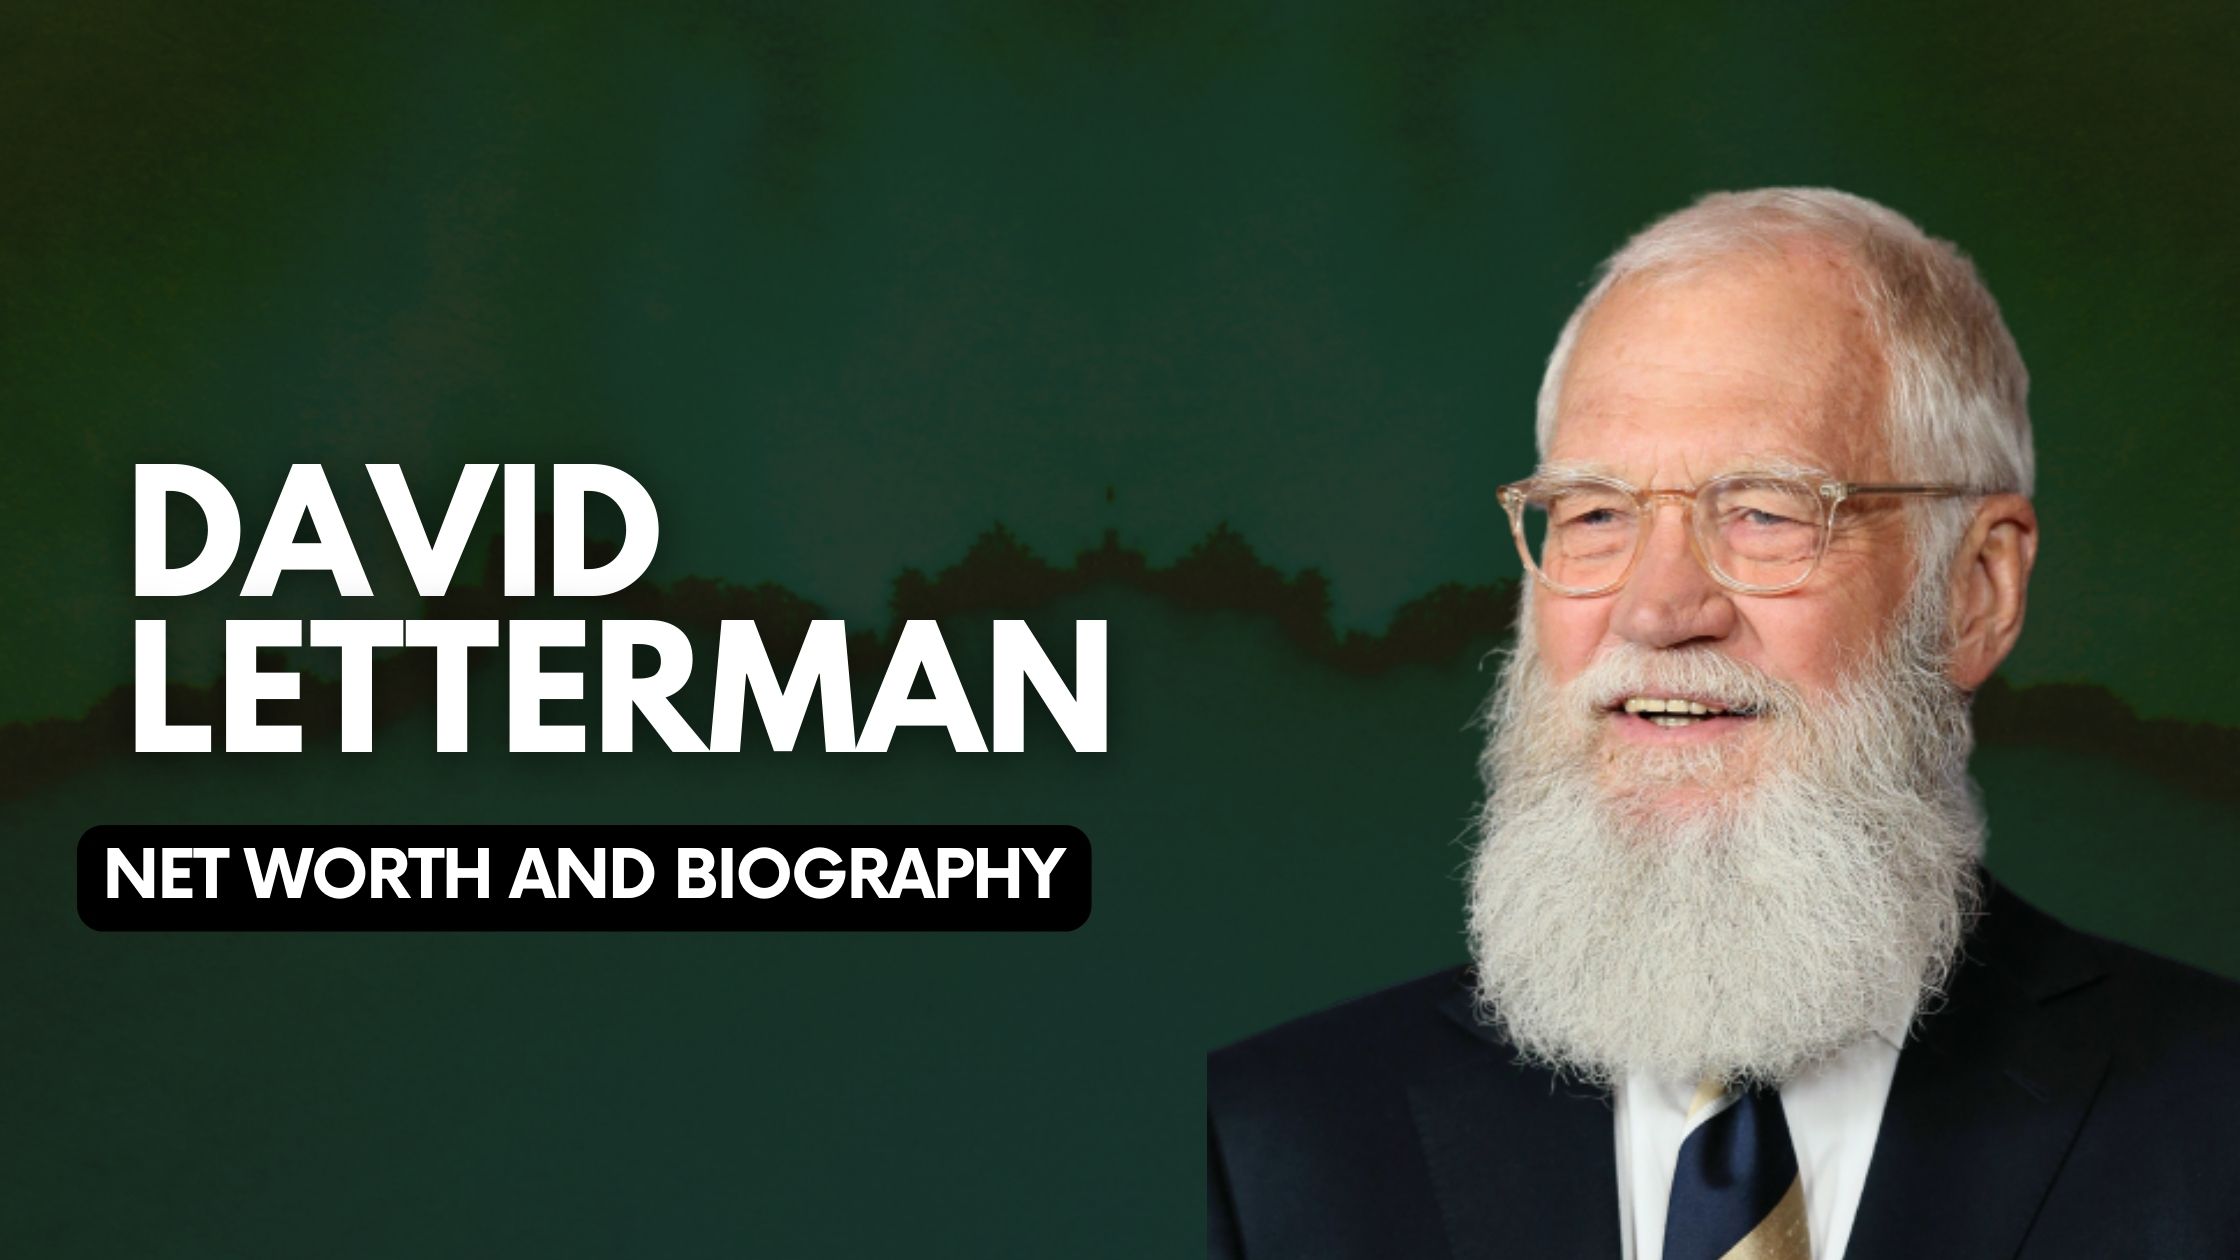 David Letterman Net Worth And Biography